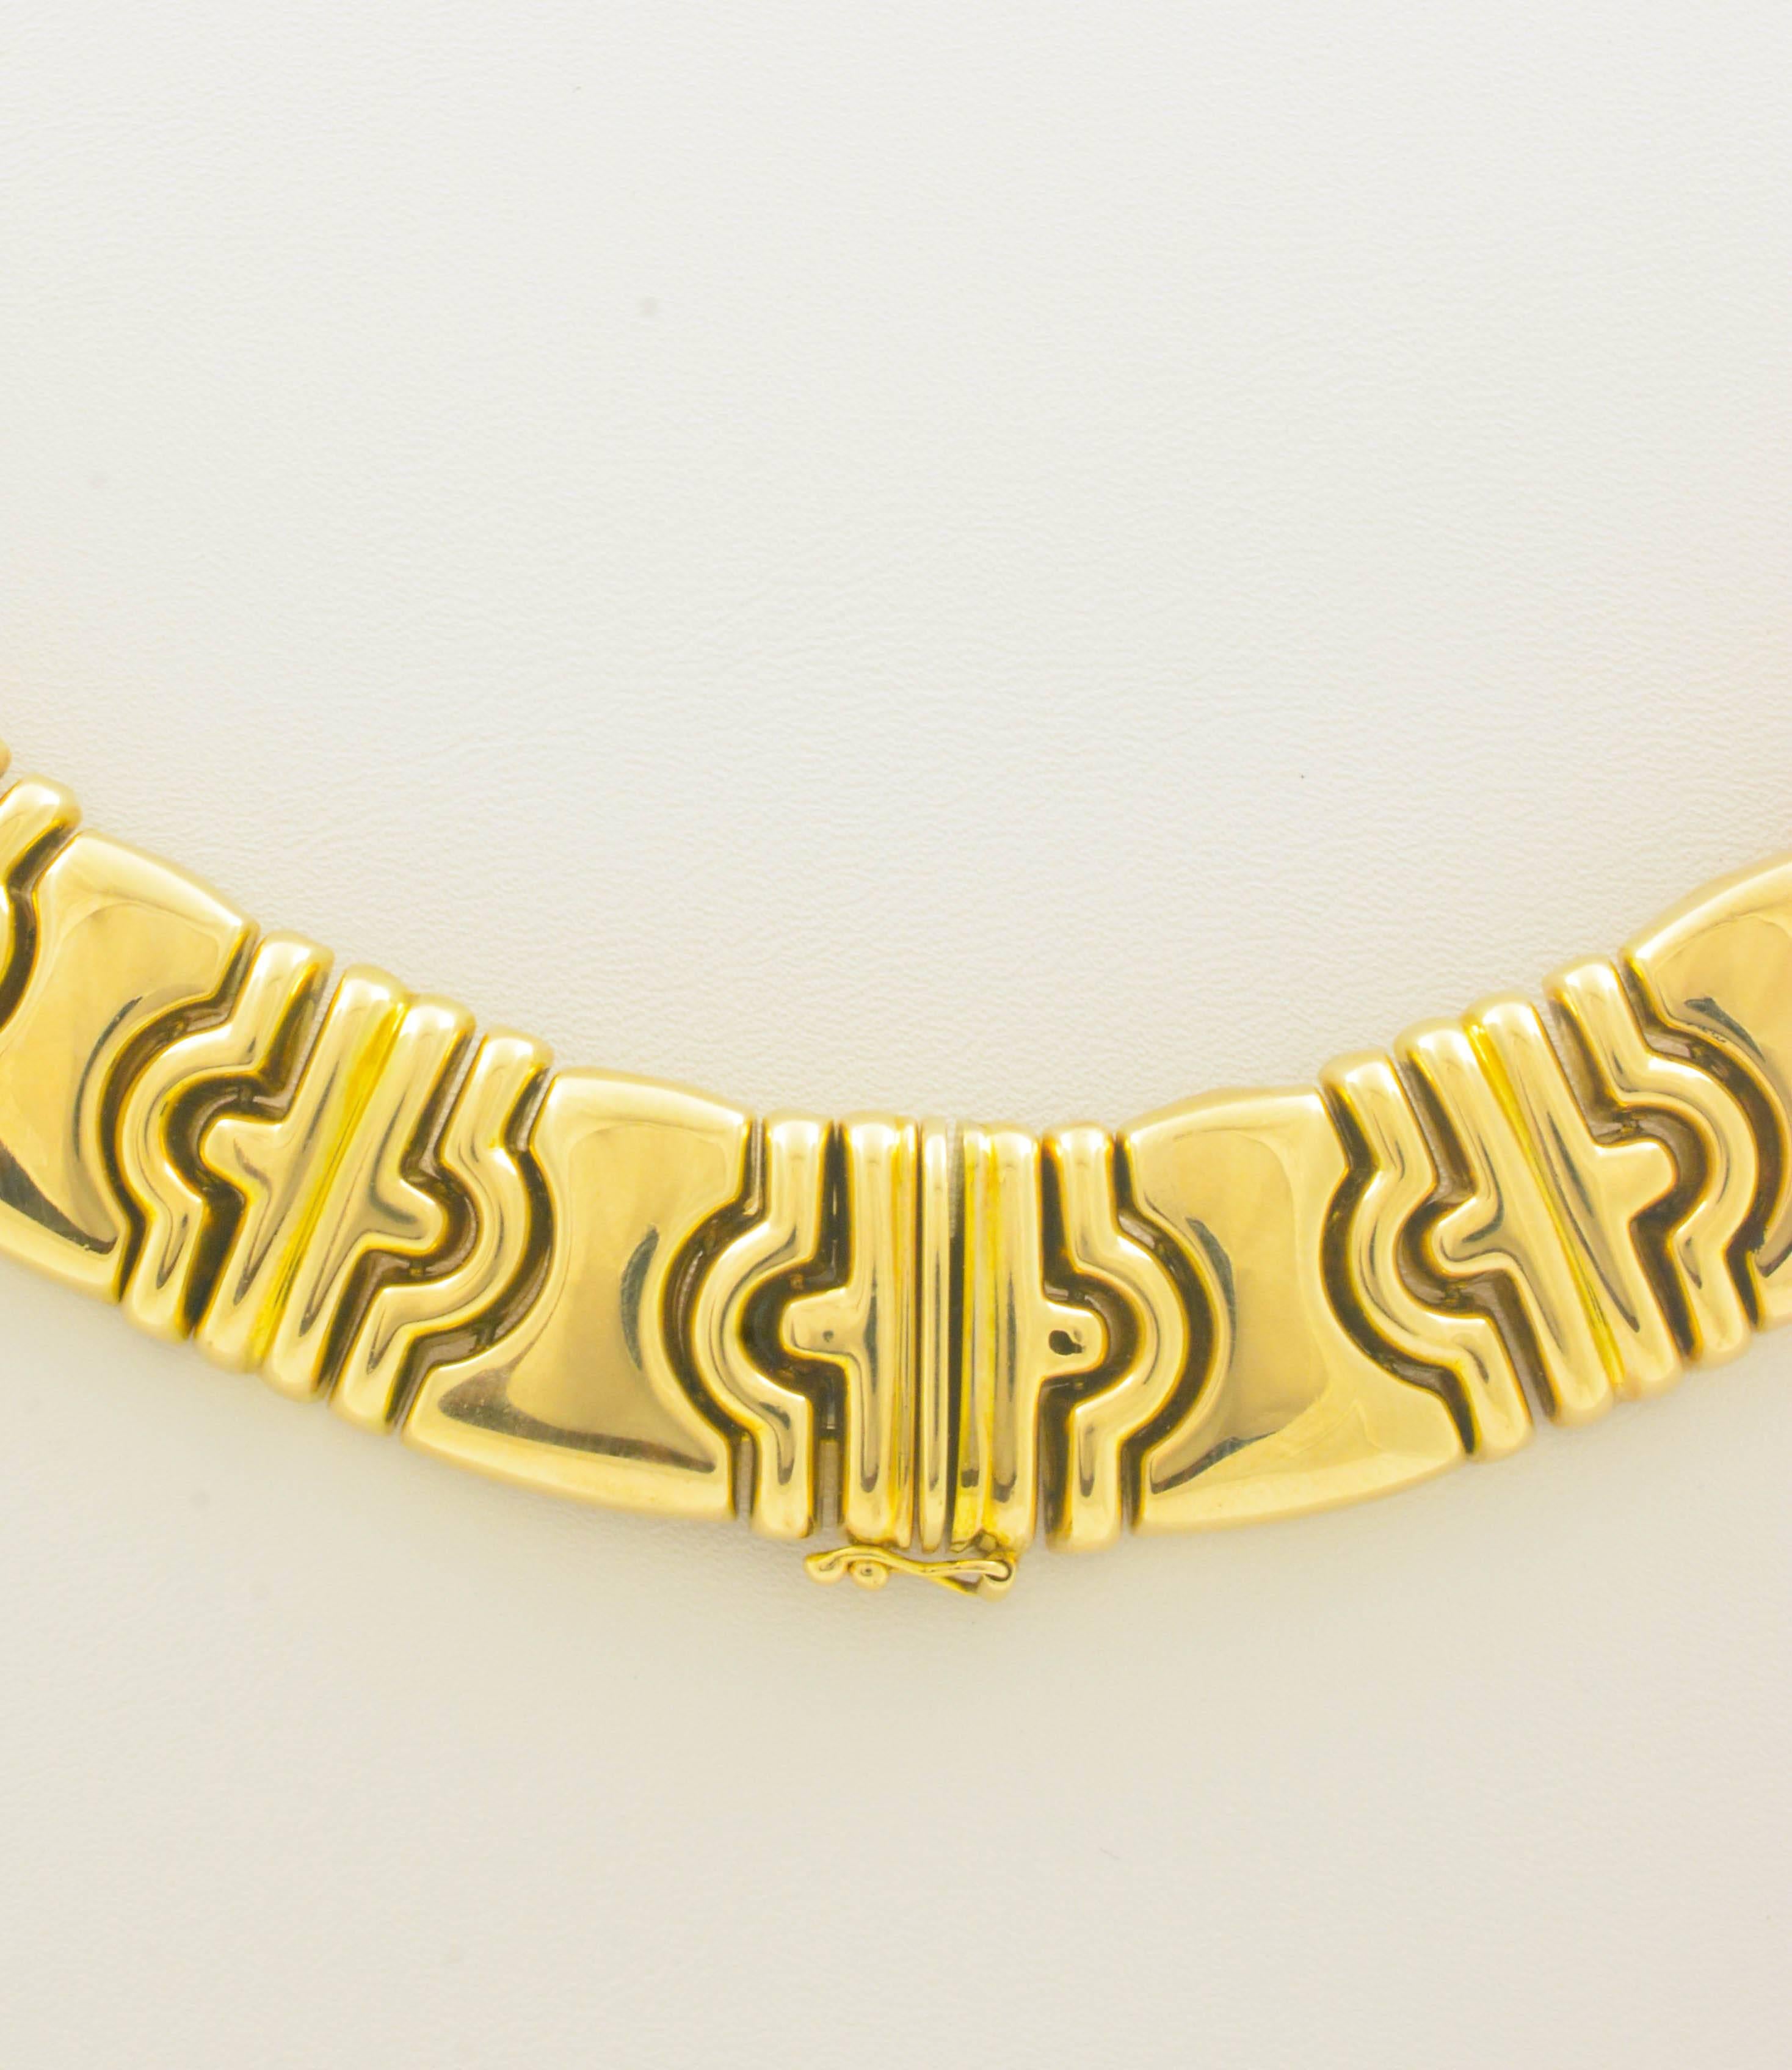 This 14kt yellow gold collar necklace is fashioned in stunning Byzantine style. Measuring 17in long and 3/4in wide, it draws the eye by alternating wide high polished links with sections of three smaller domed links. The total weight of this